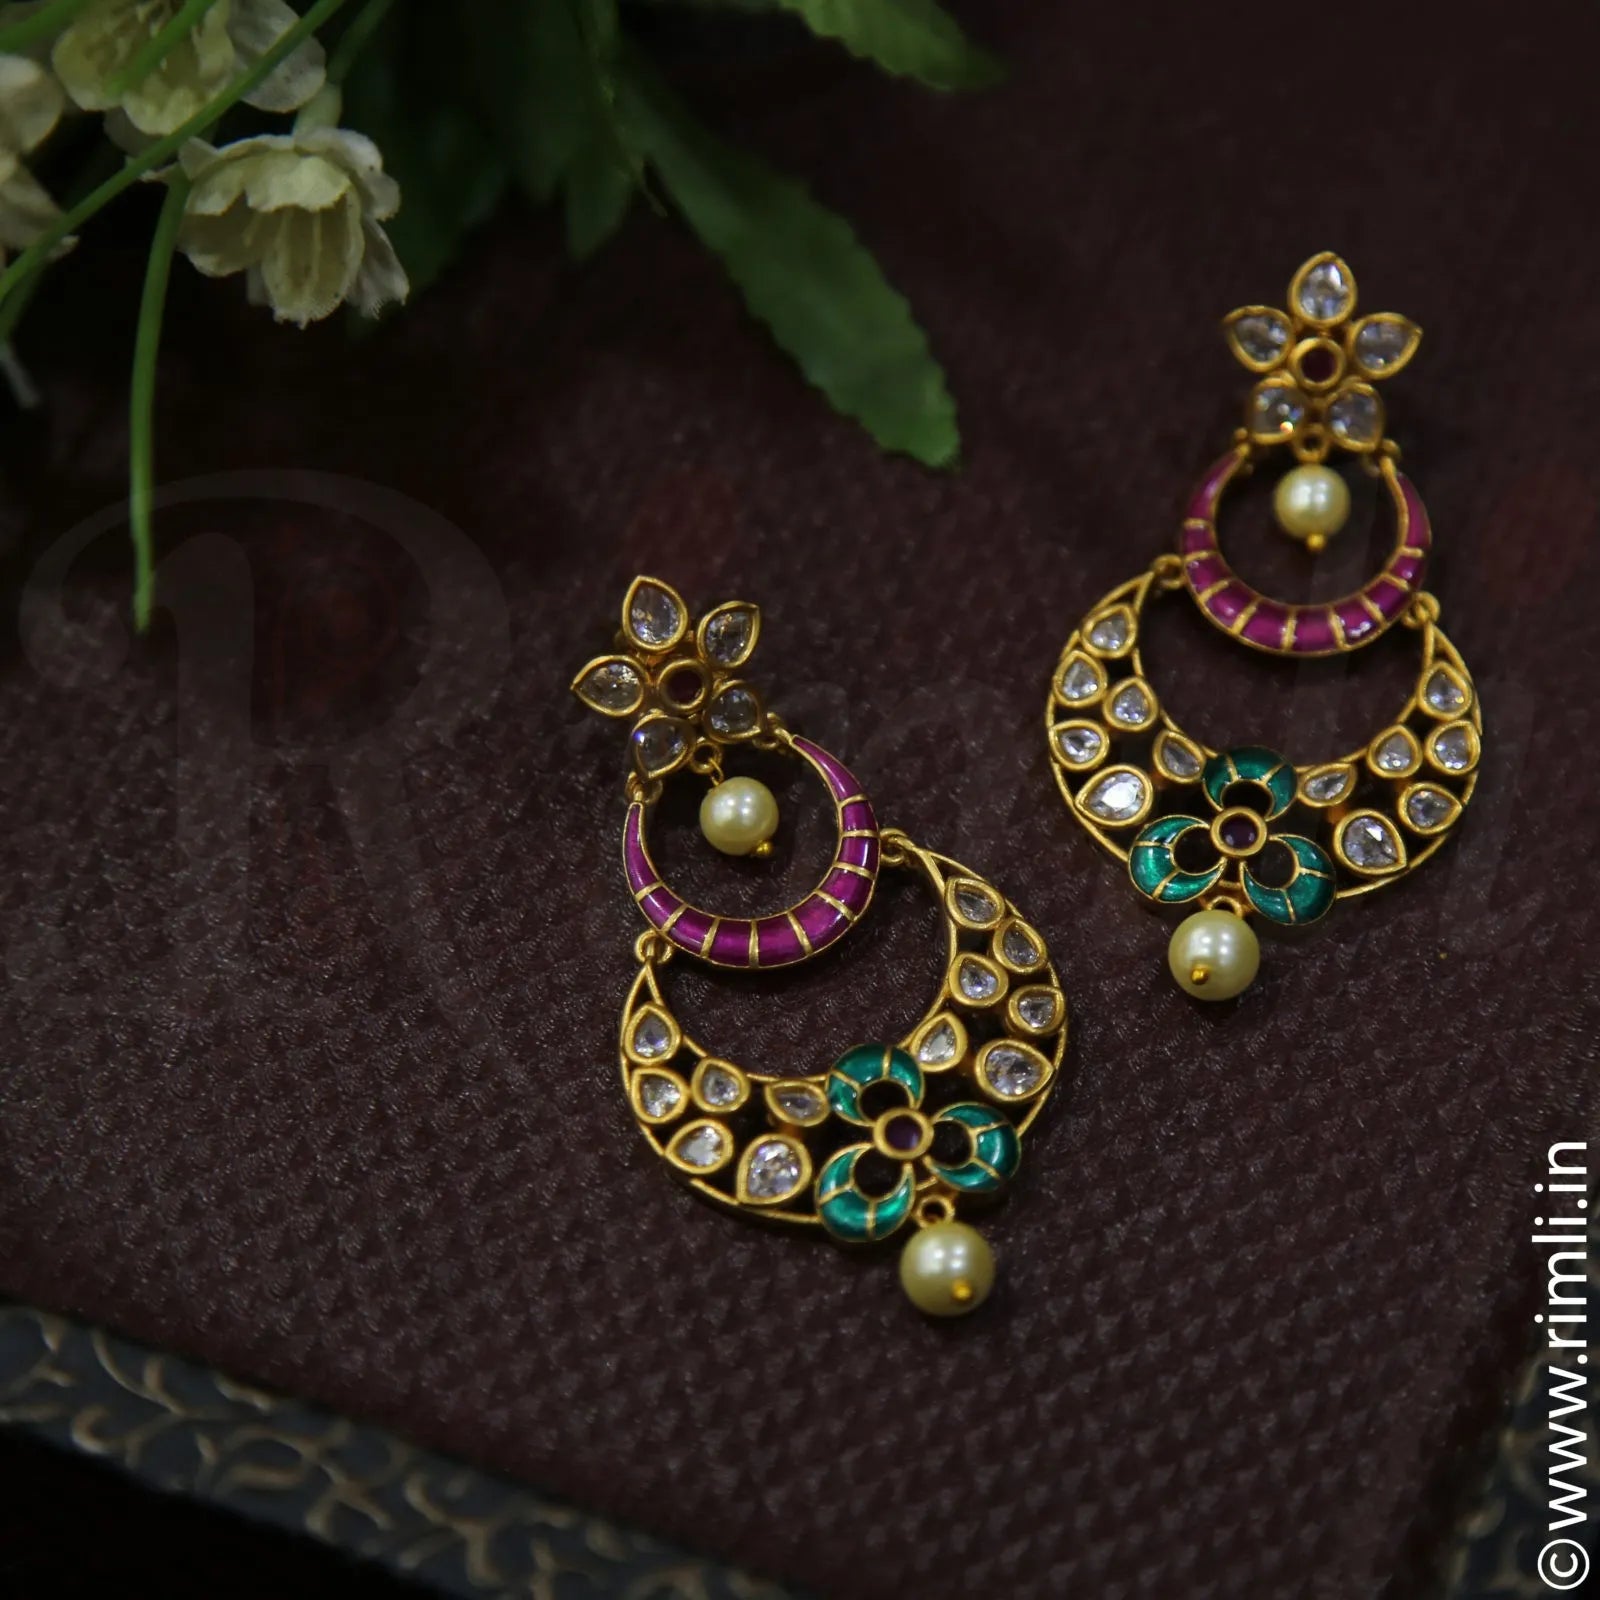 Antique Chandbali Earrings With Stones And Enamel Work